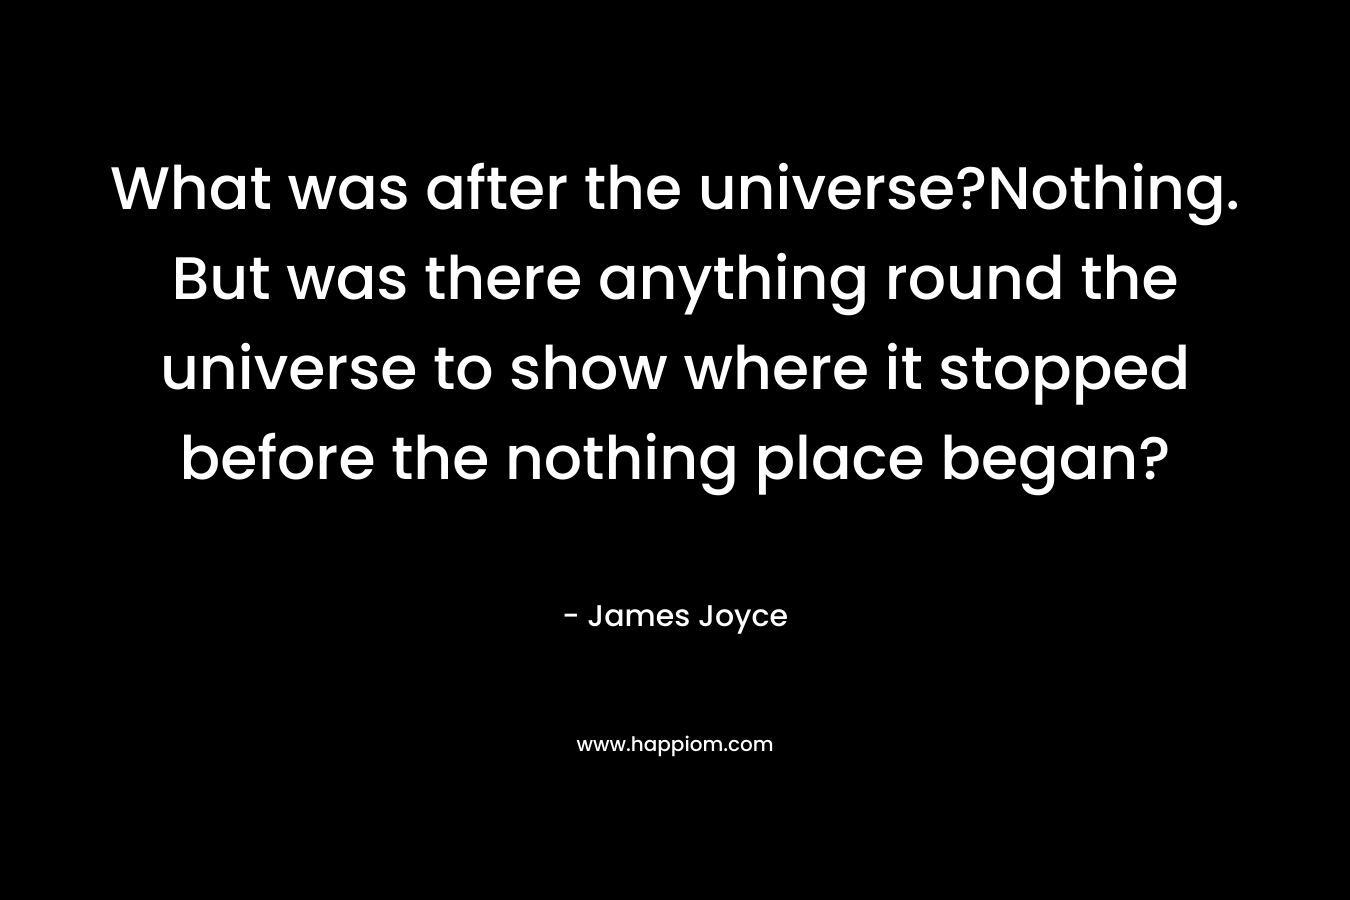 What was after the universe?Nothing. But was there anything round the universe to show where it stopped before the nothing place began? – James Joyce